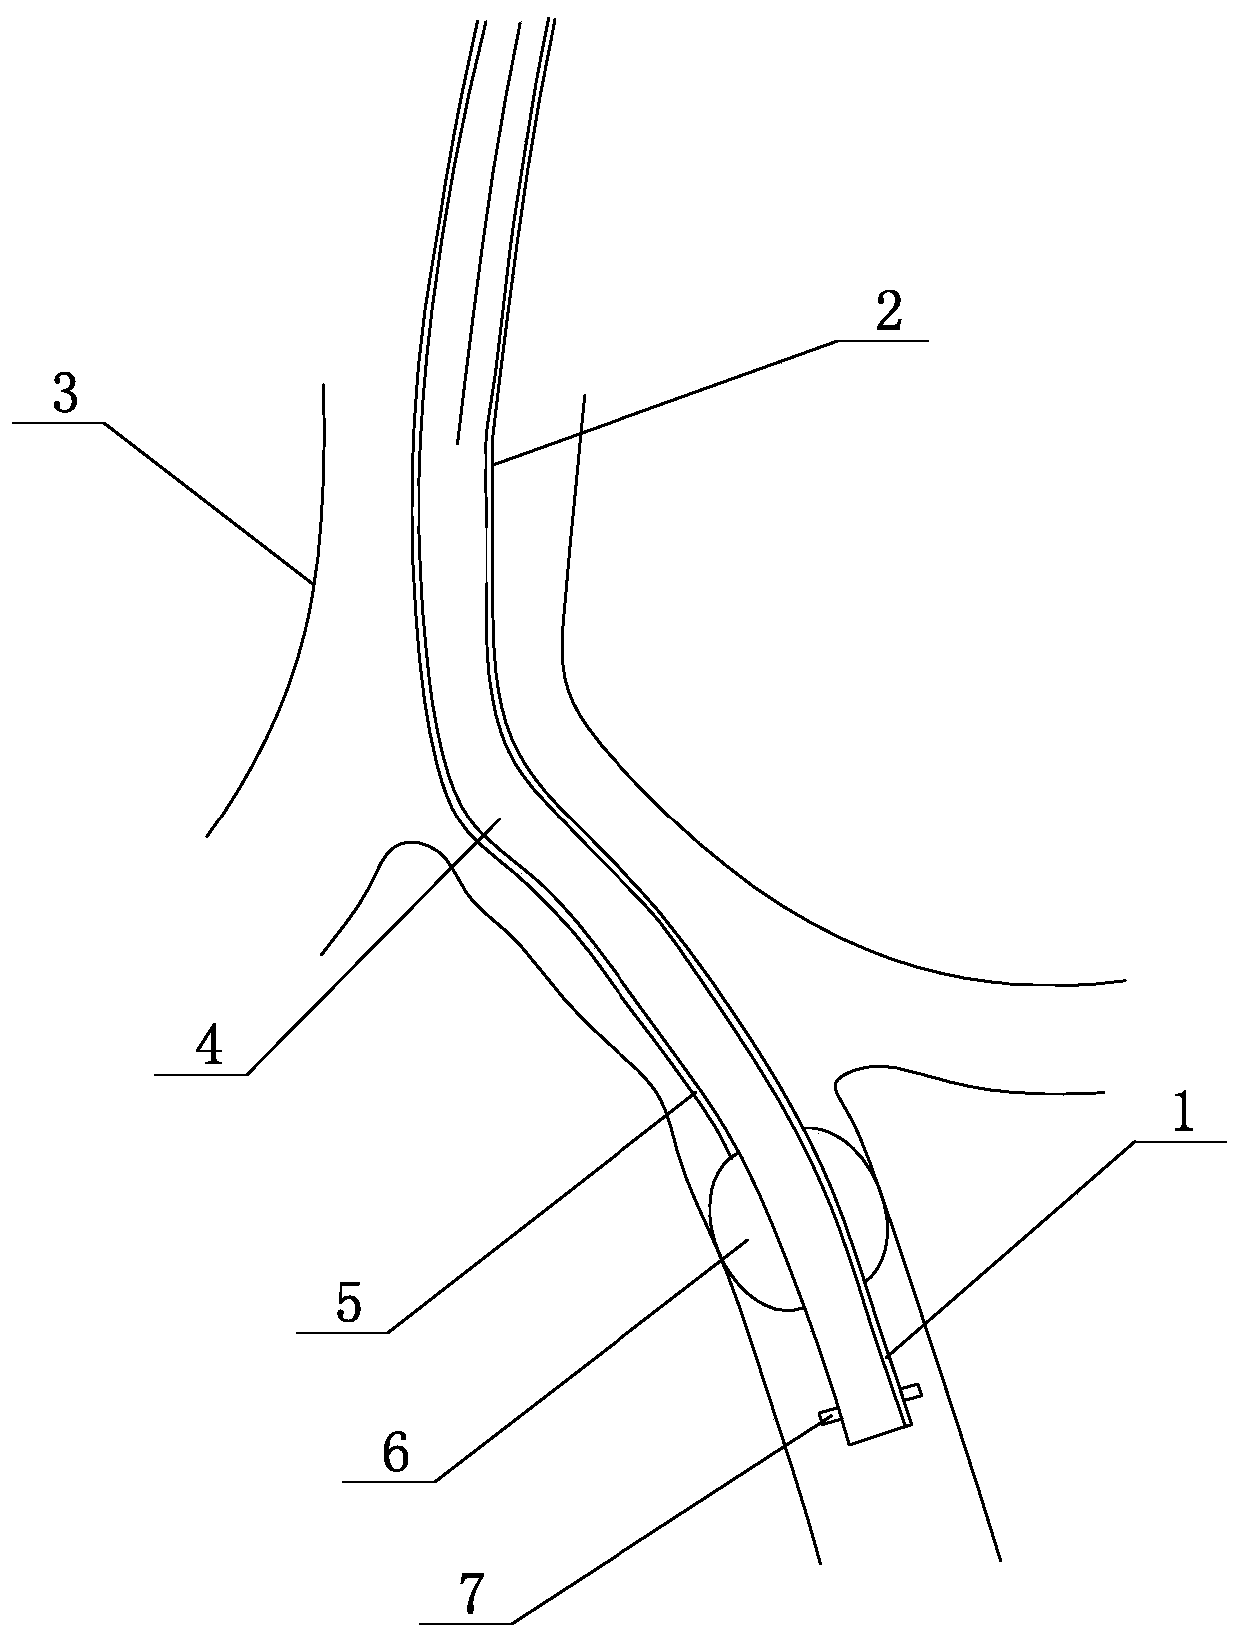 Visual high- selectivity closed bronchus comprehensive treatment device